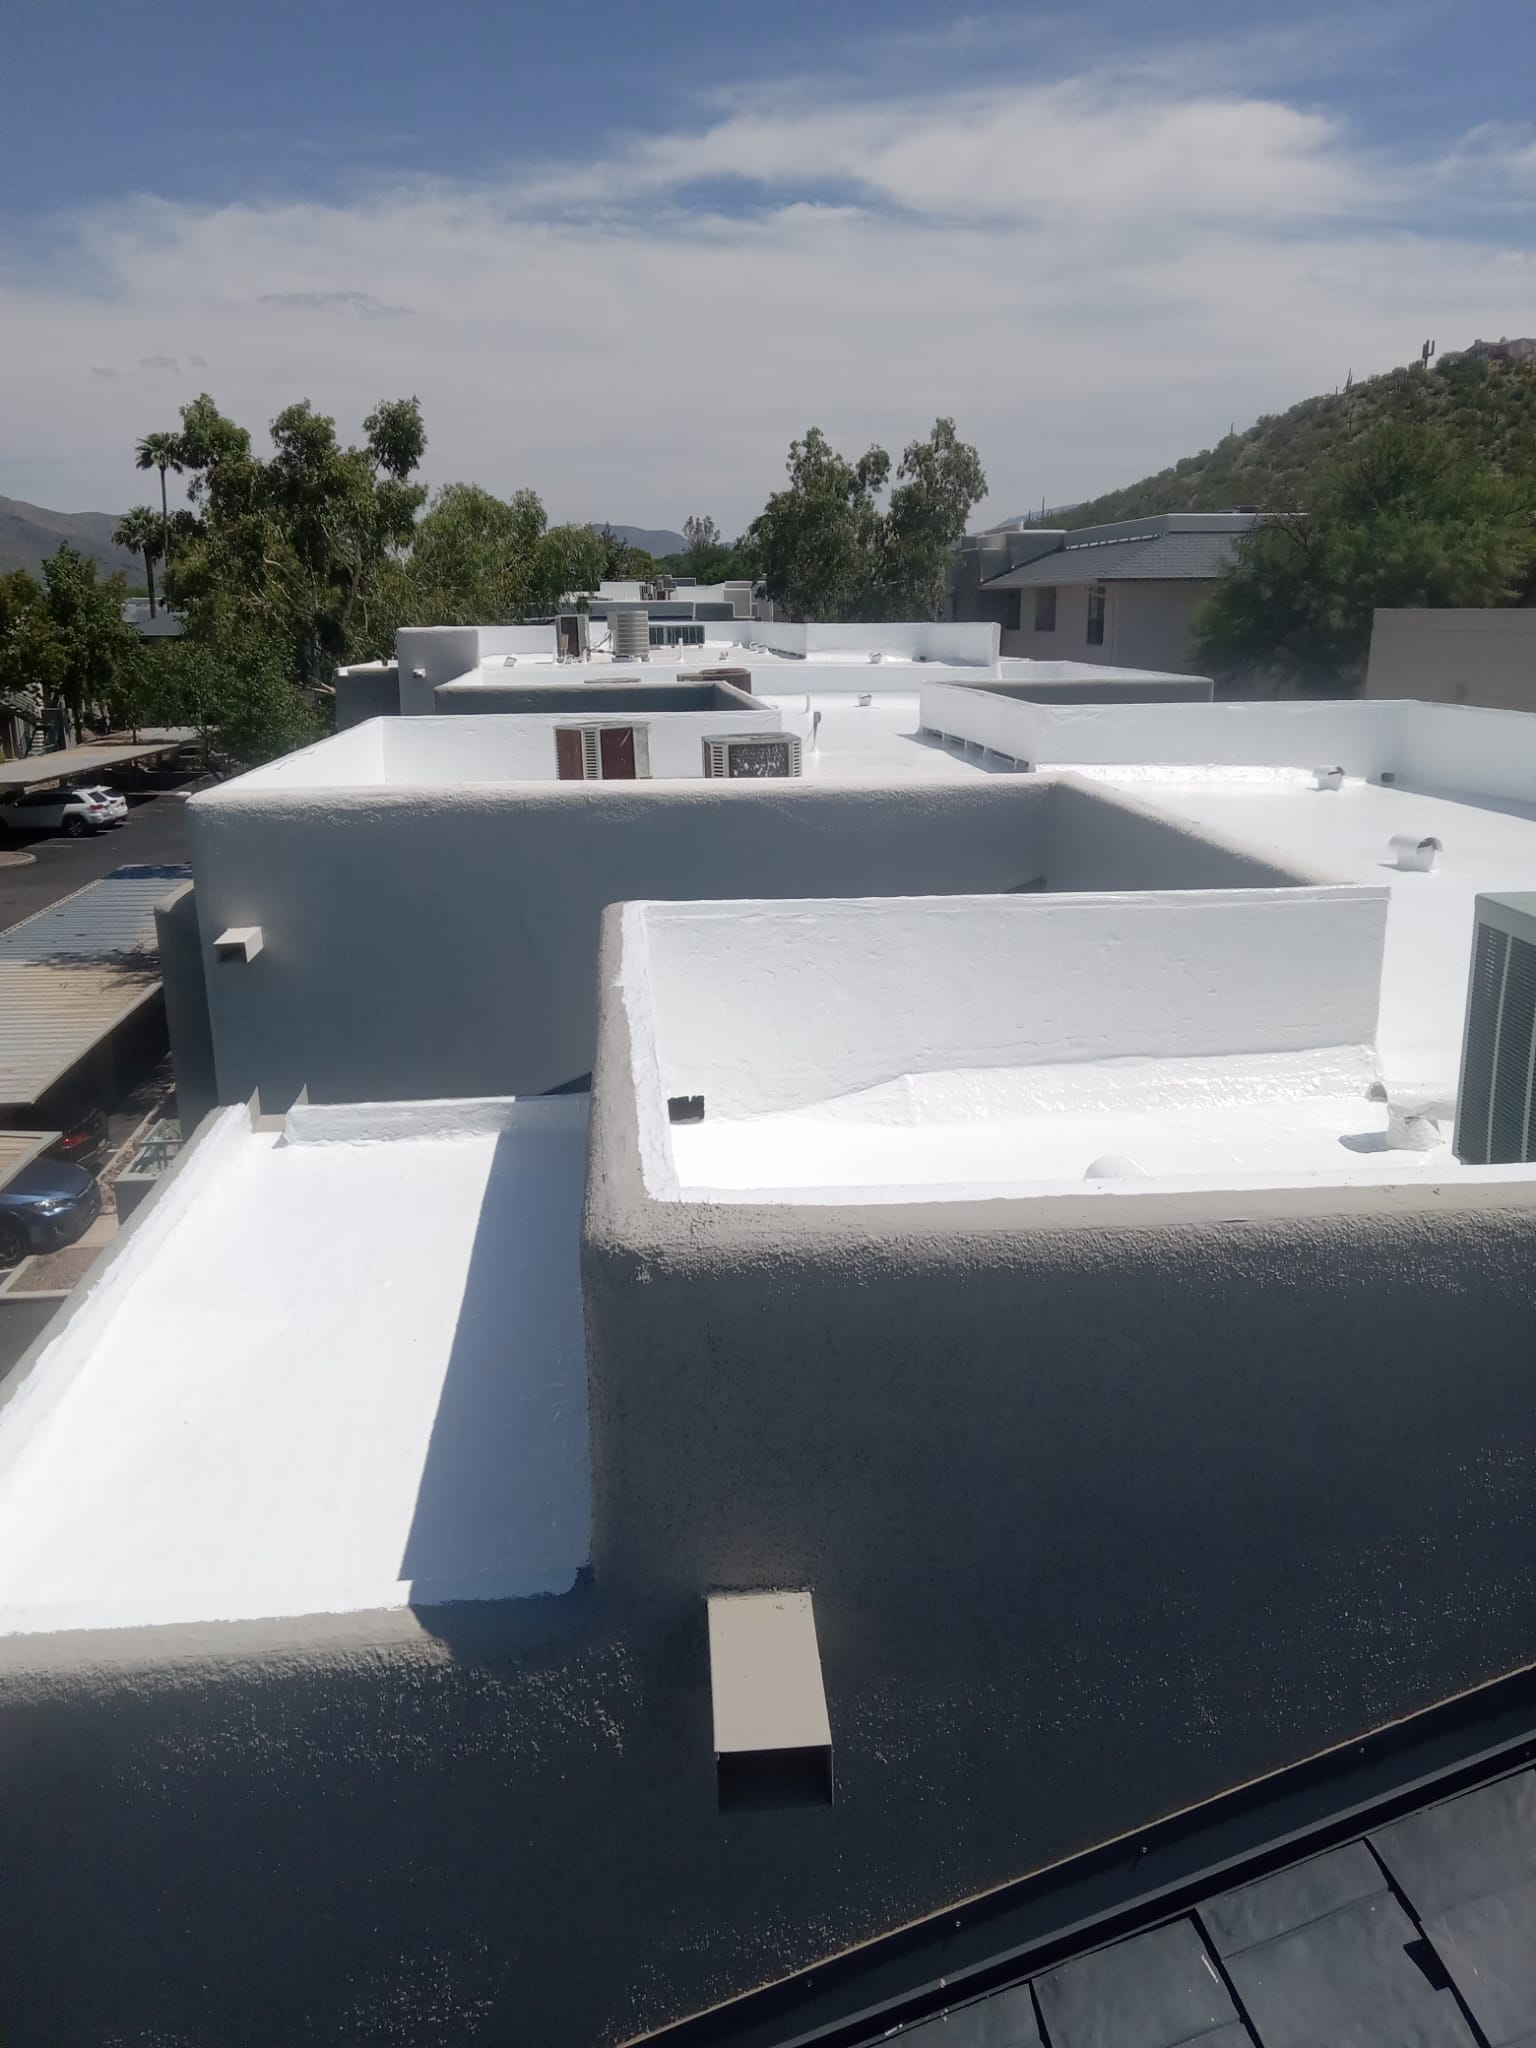 Multi-family housing in Silverleaf updated with a new spray foam roof for better insulation.